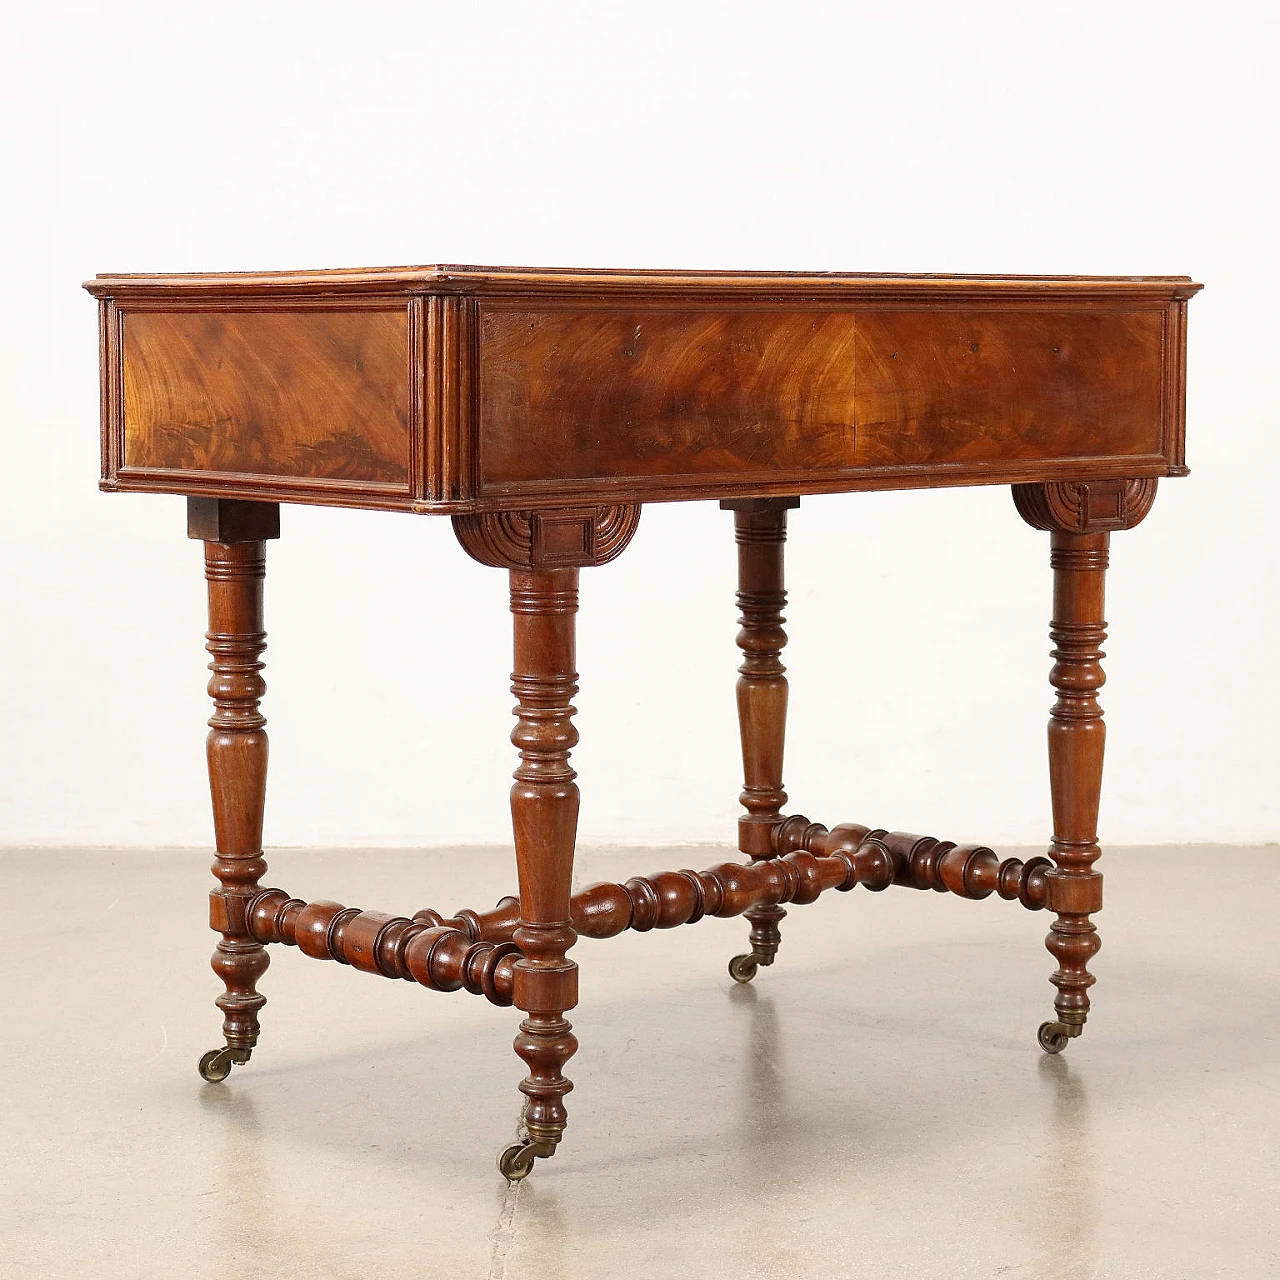 Early Victorian mahogany feather panelled writing desk, mid-19th century 9